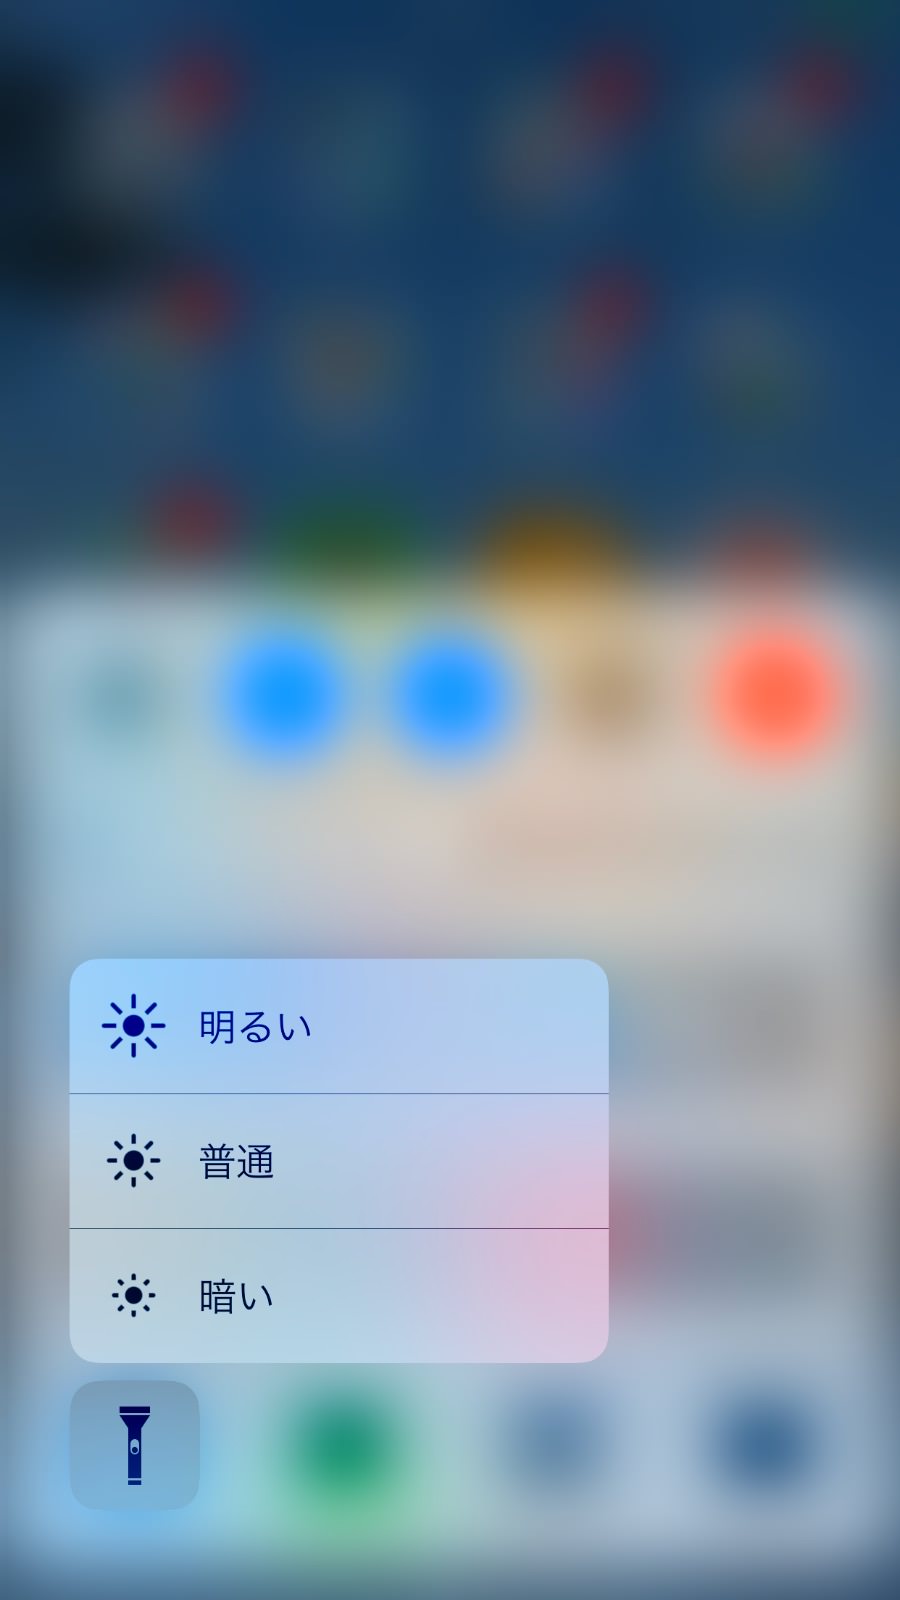 3dtouch control center 5313